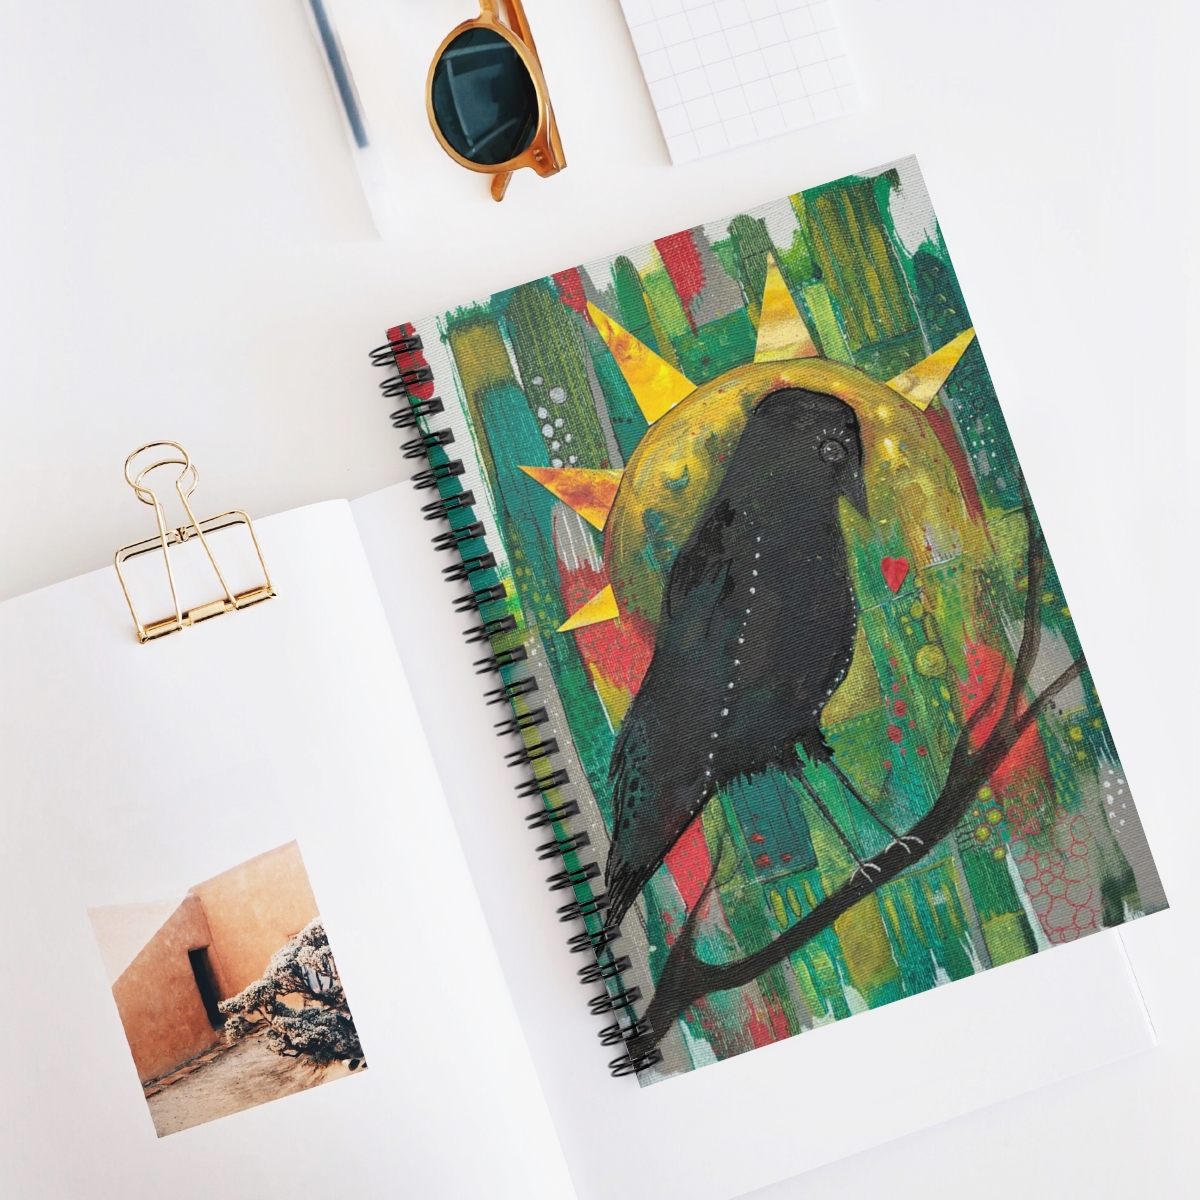 Special crow journal in context. Black crow sits on a branch surveying her patchwork kingdom of reds, greens and grey. Yellow sun behind her looks like her crown.